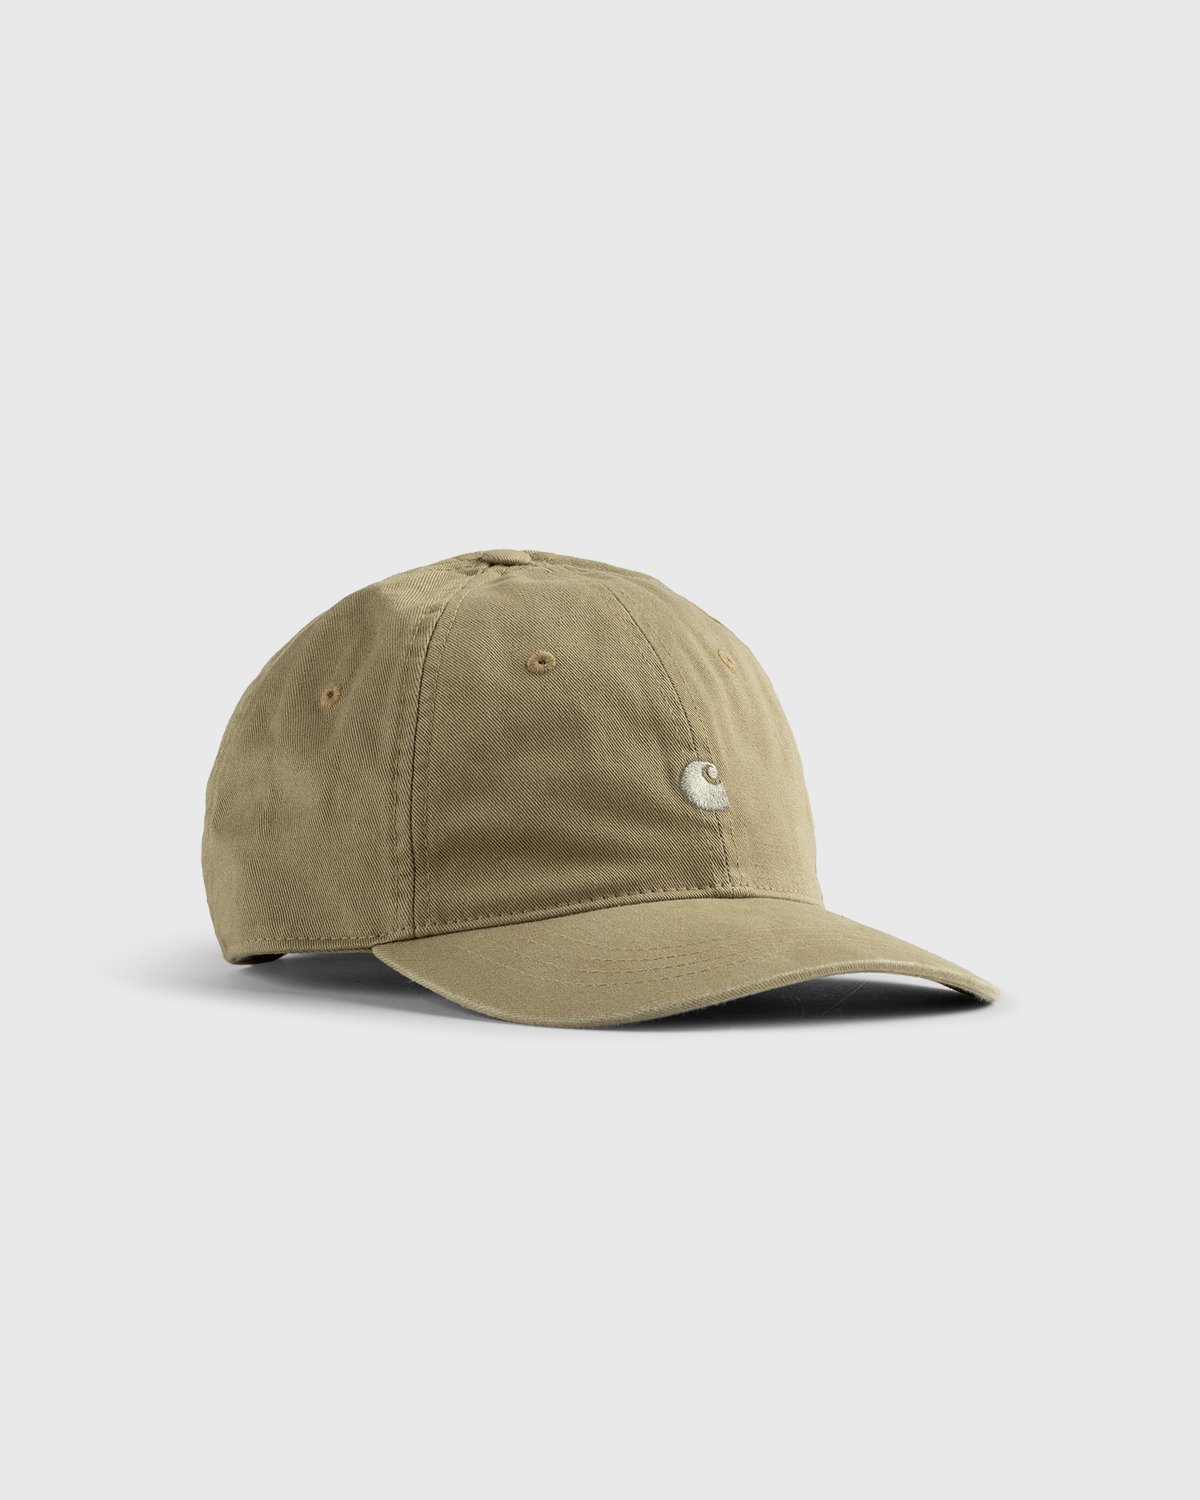 Carhartt WIP - Madison Logo Cap Natural Wall - Accessories - Beige - Image 1